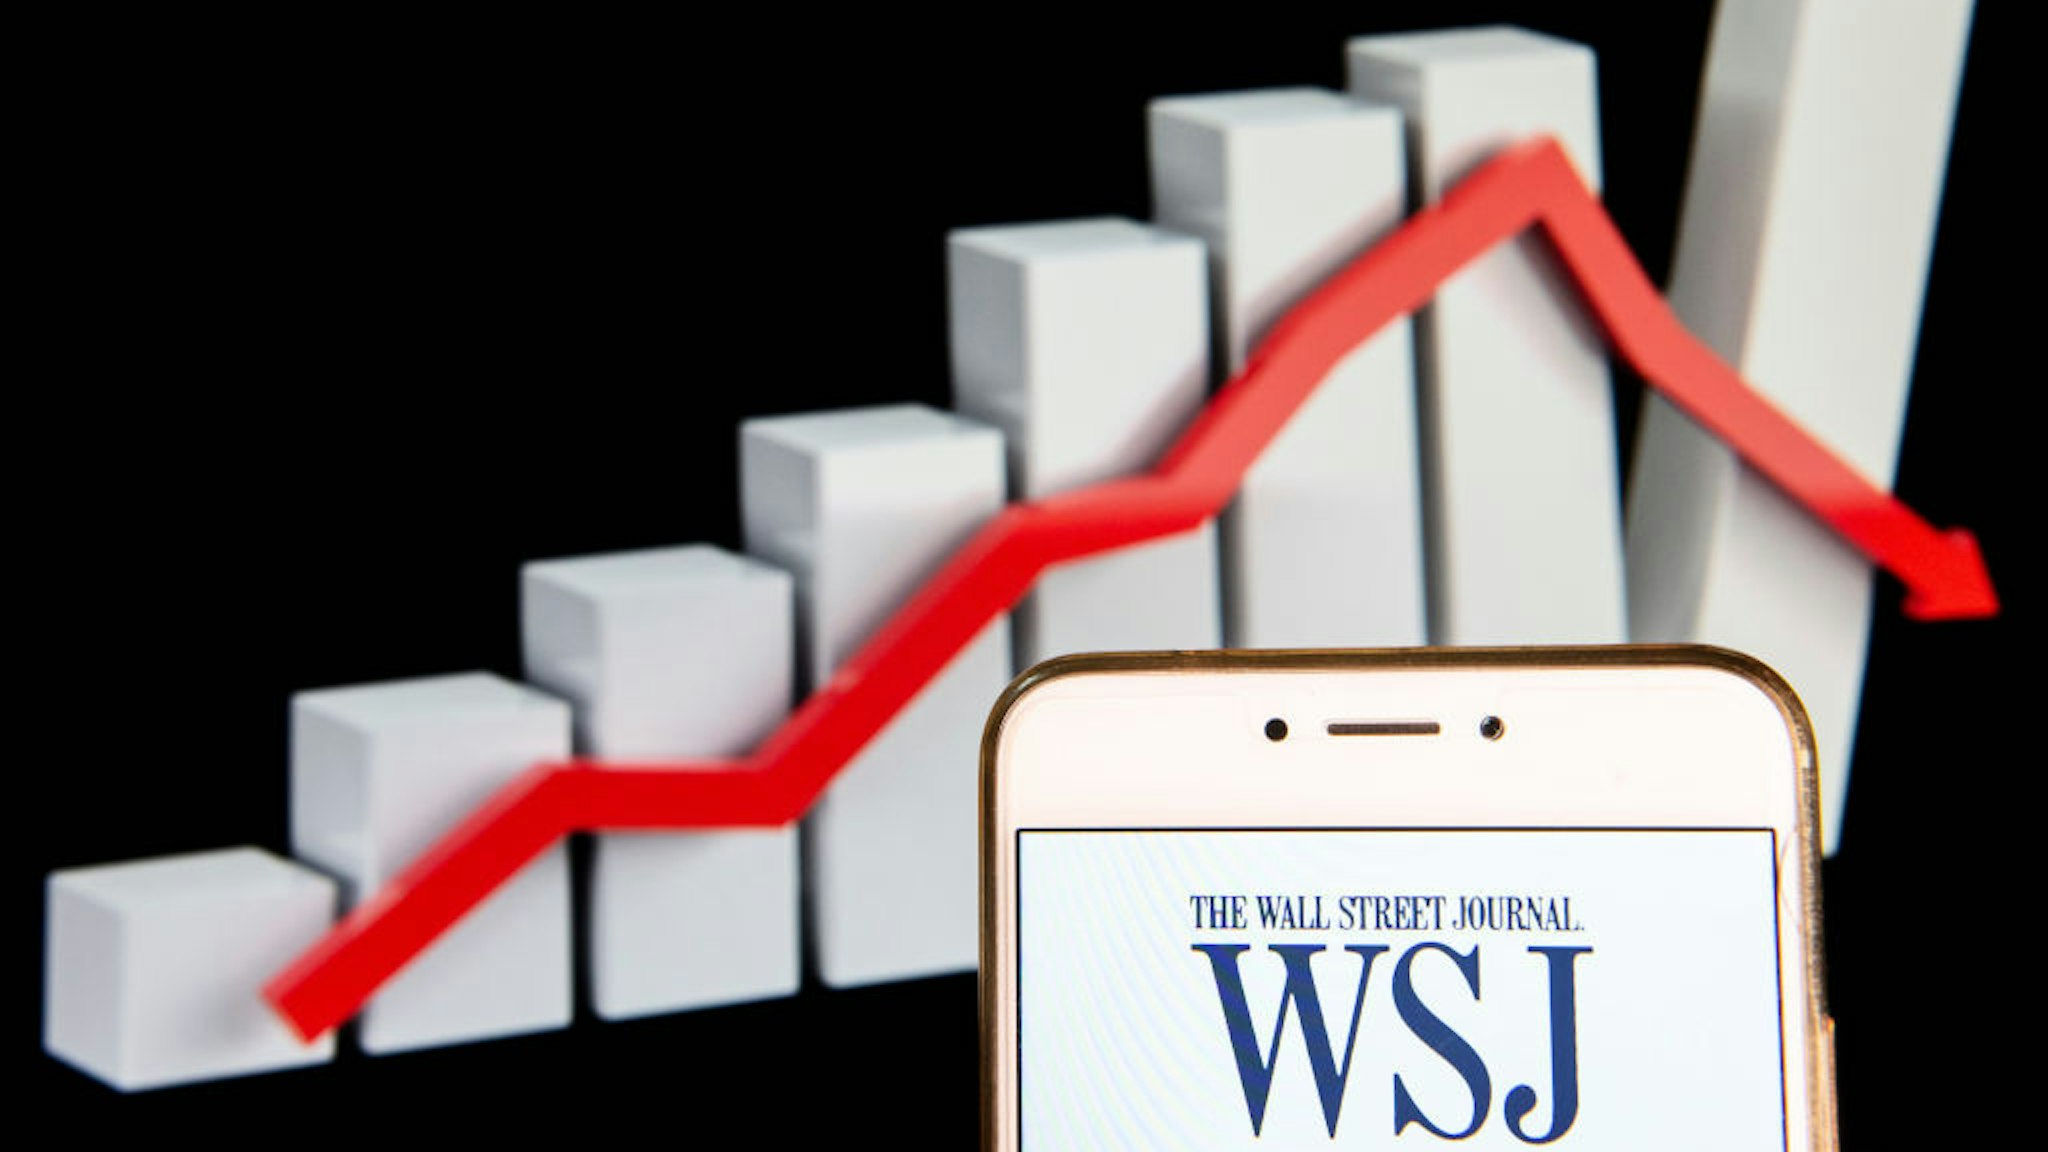 HONG KONG - 2018/12/14: American business focused international daily newspaper The Wall Street Journal logo is seen on an Android mobile device with a graph showing sharp losses in the background. (Photo by Miguel Candela/SOPA Images/LightRocket via Getty Images)